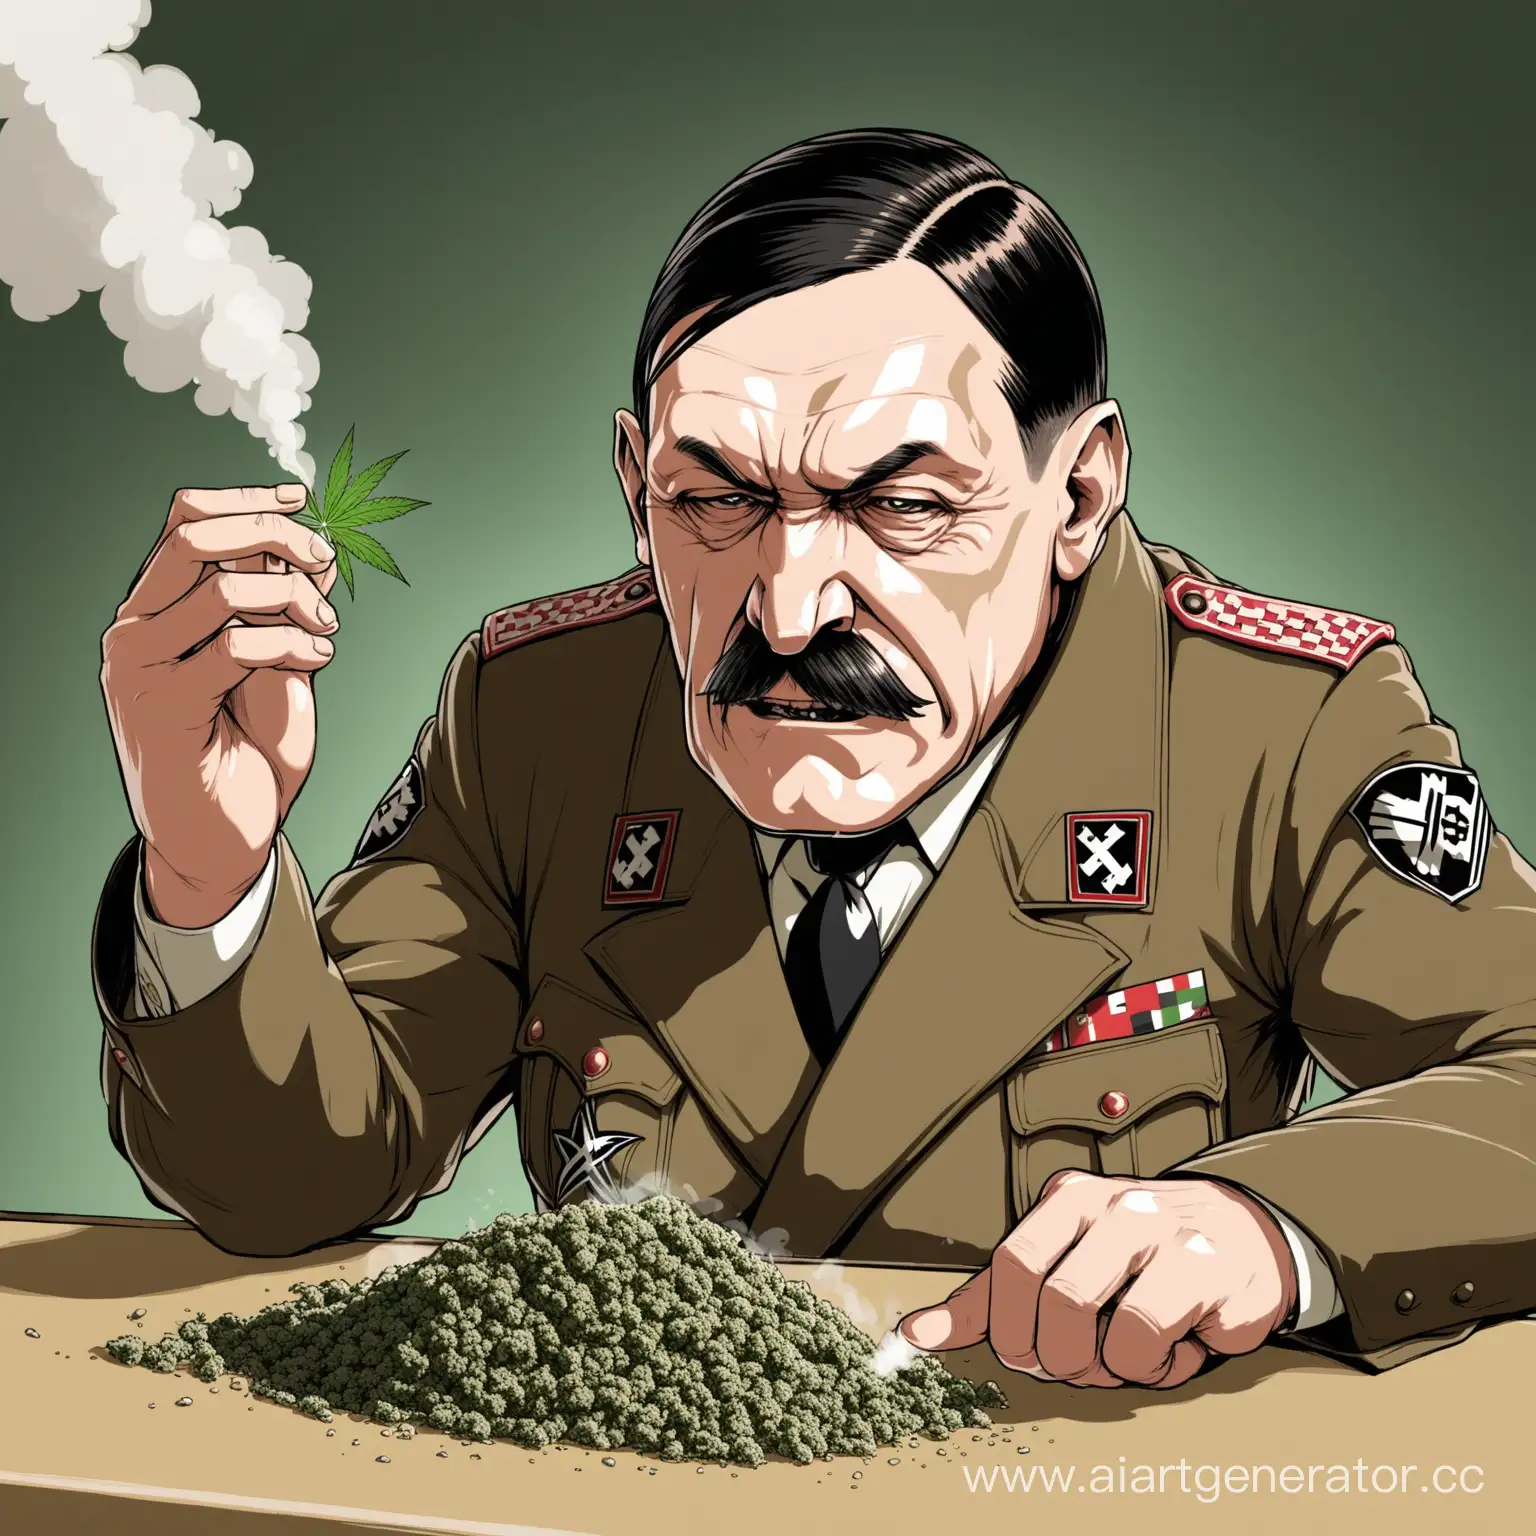 Adolf-Hitler-Rolling-Weed-Historical-Figure-Engaged-in-Unusual-Activity